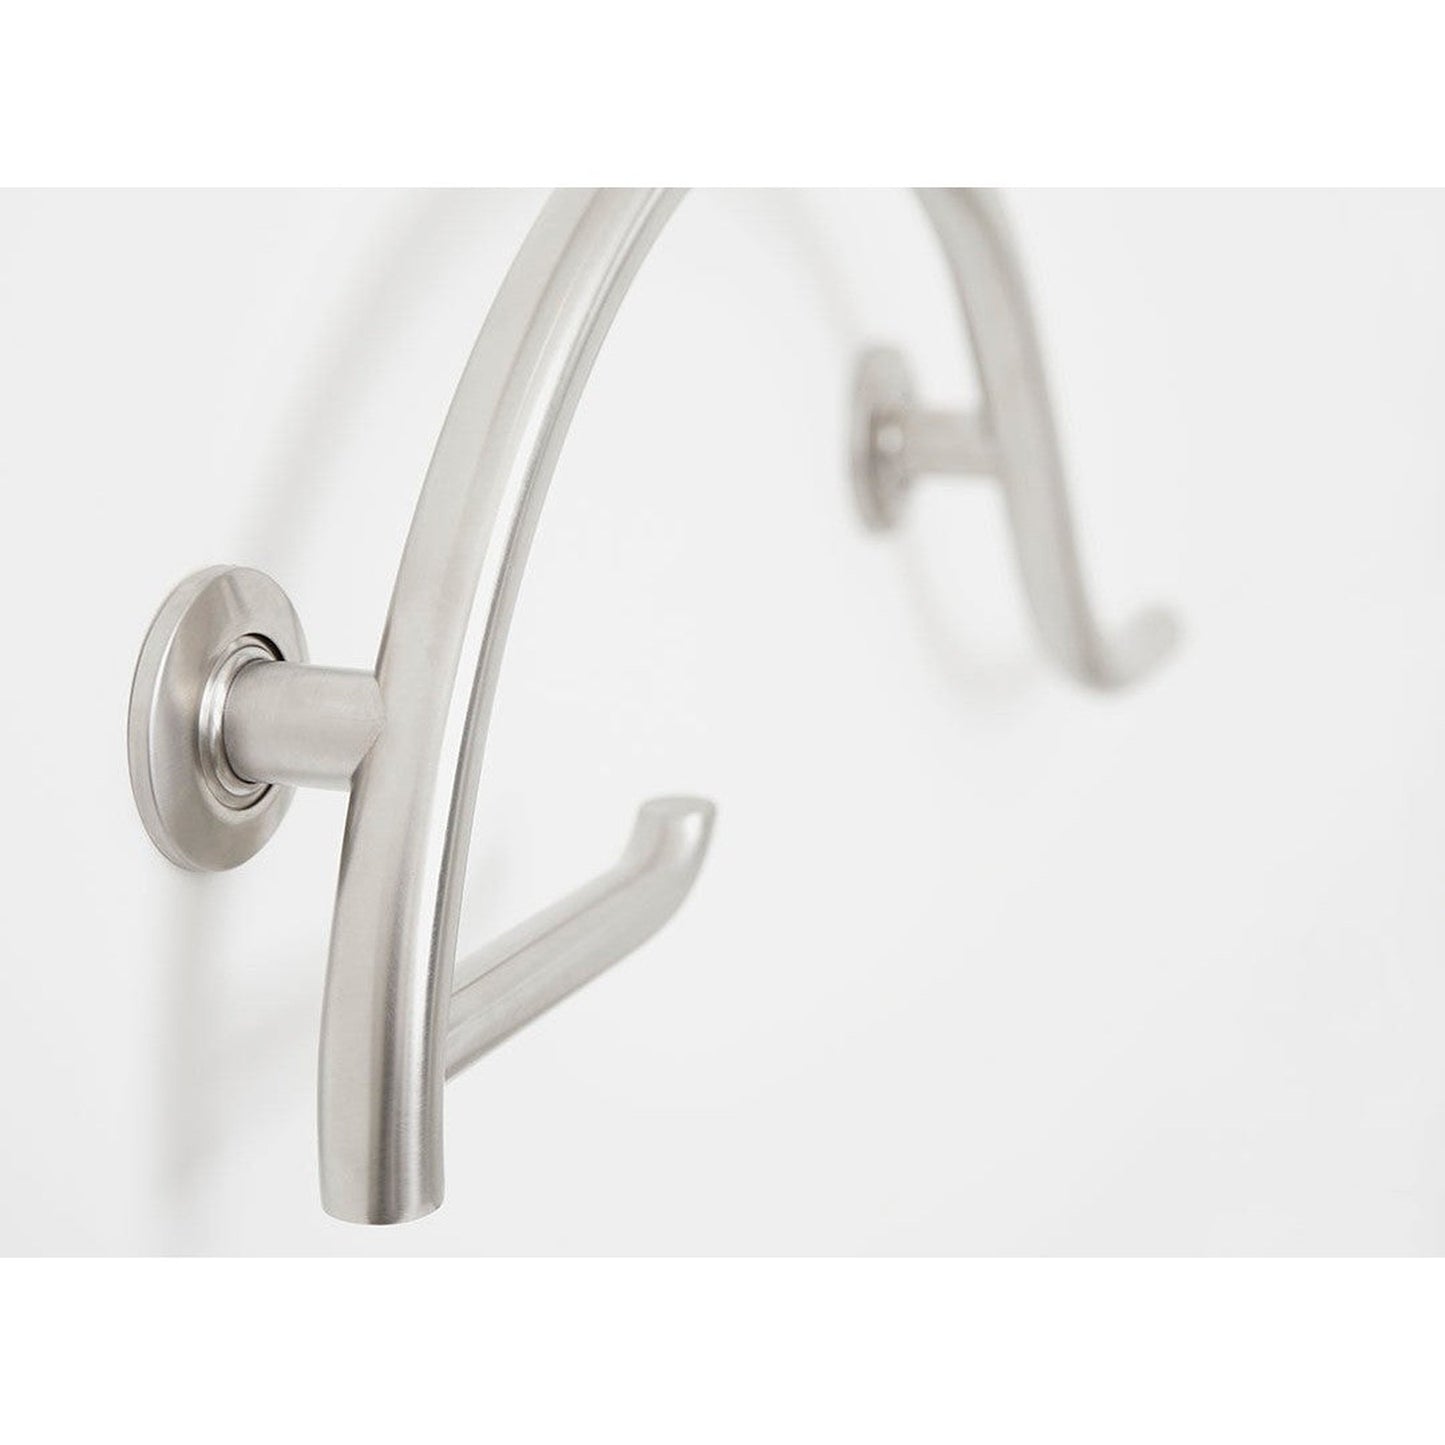 Seachrome Lifestyle & Wellness 30" Polished Stainless Steel 1.25 Diameter Concealed Flange Left-Handed Configuration Pismo Curved Grab Bar With Toilet Paper Holder